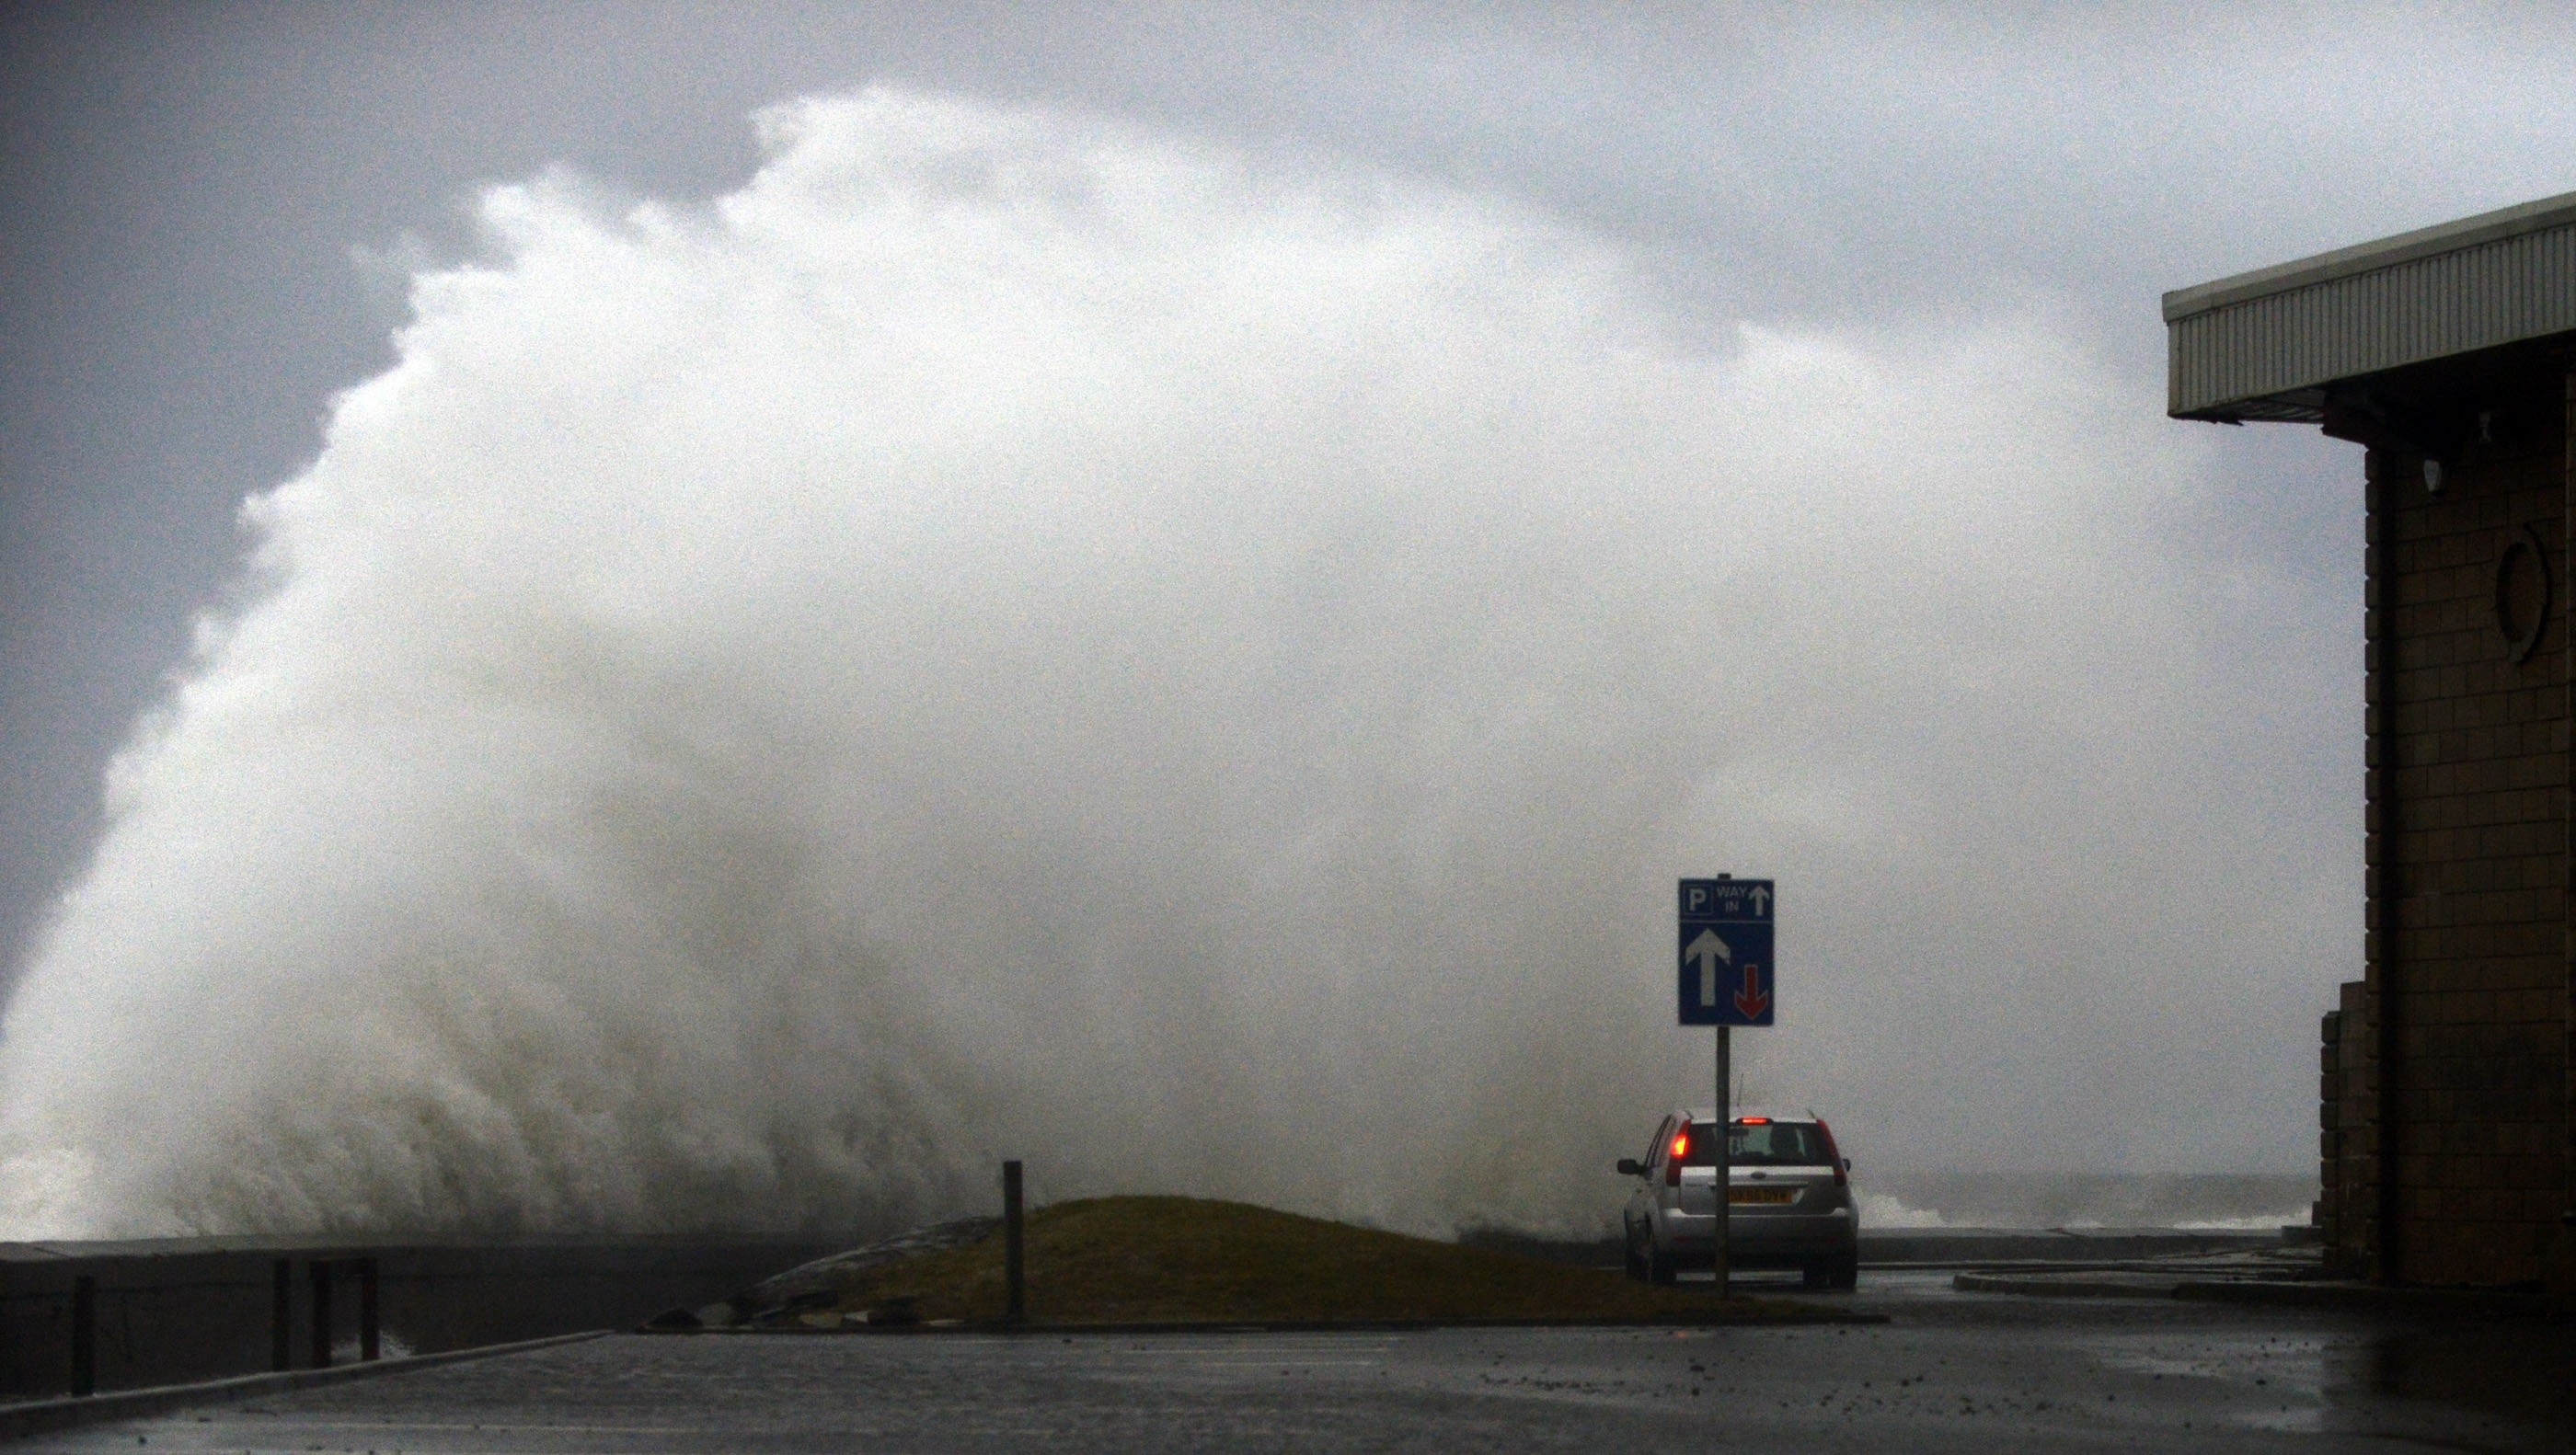 Waves crash into the town of Saltcoats, Ayrshire as the remnants of Storm Jonas batter Scotland. JANUARY 26 2016.